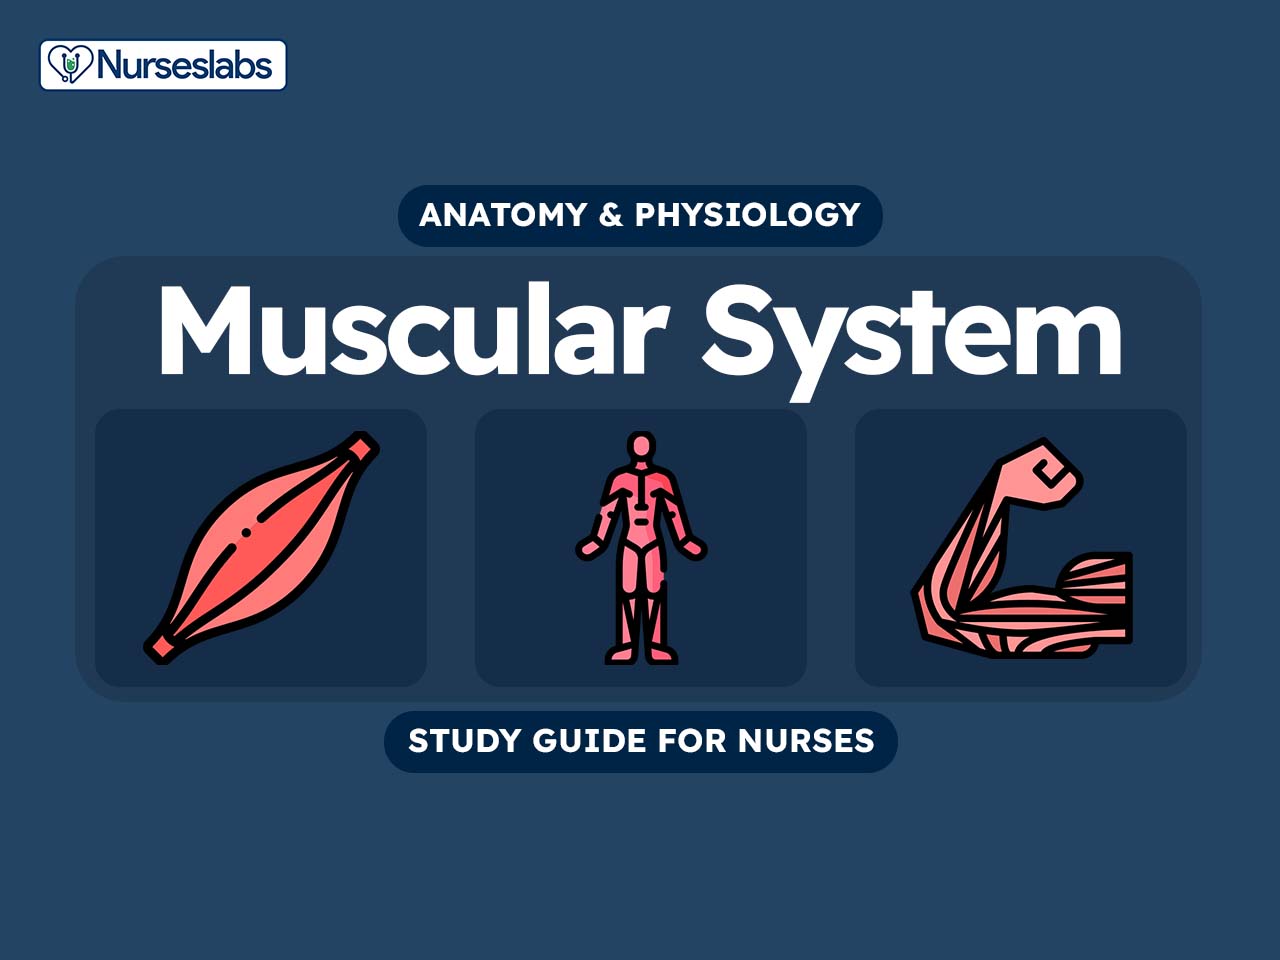 https://nurseslabs.com/wp-content/uploads/2017/07/Muscular-System-Anatomy-and-Physiology-Nursing-Study-Guide.jpg